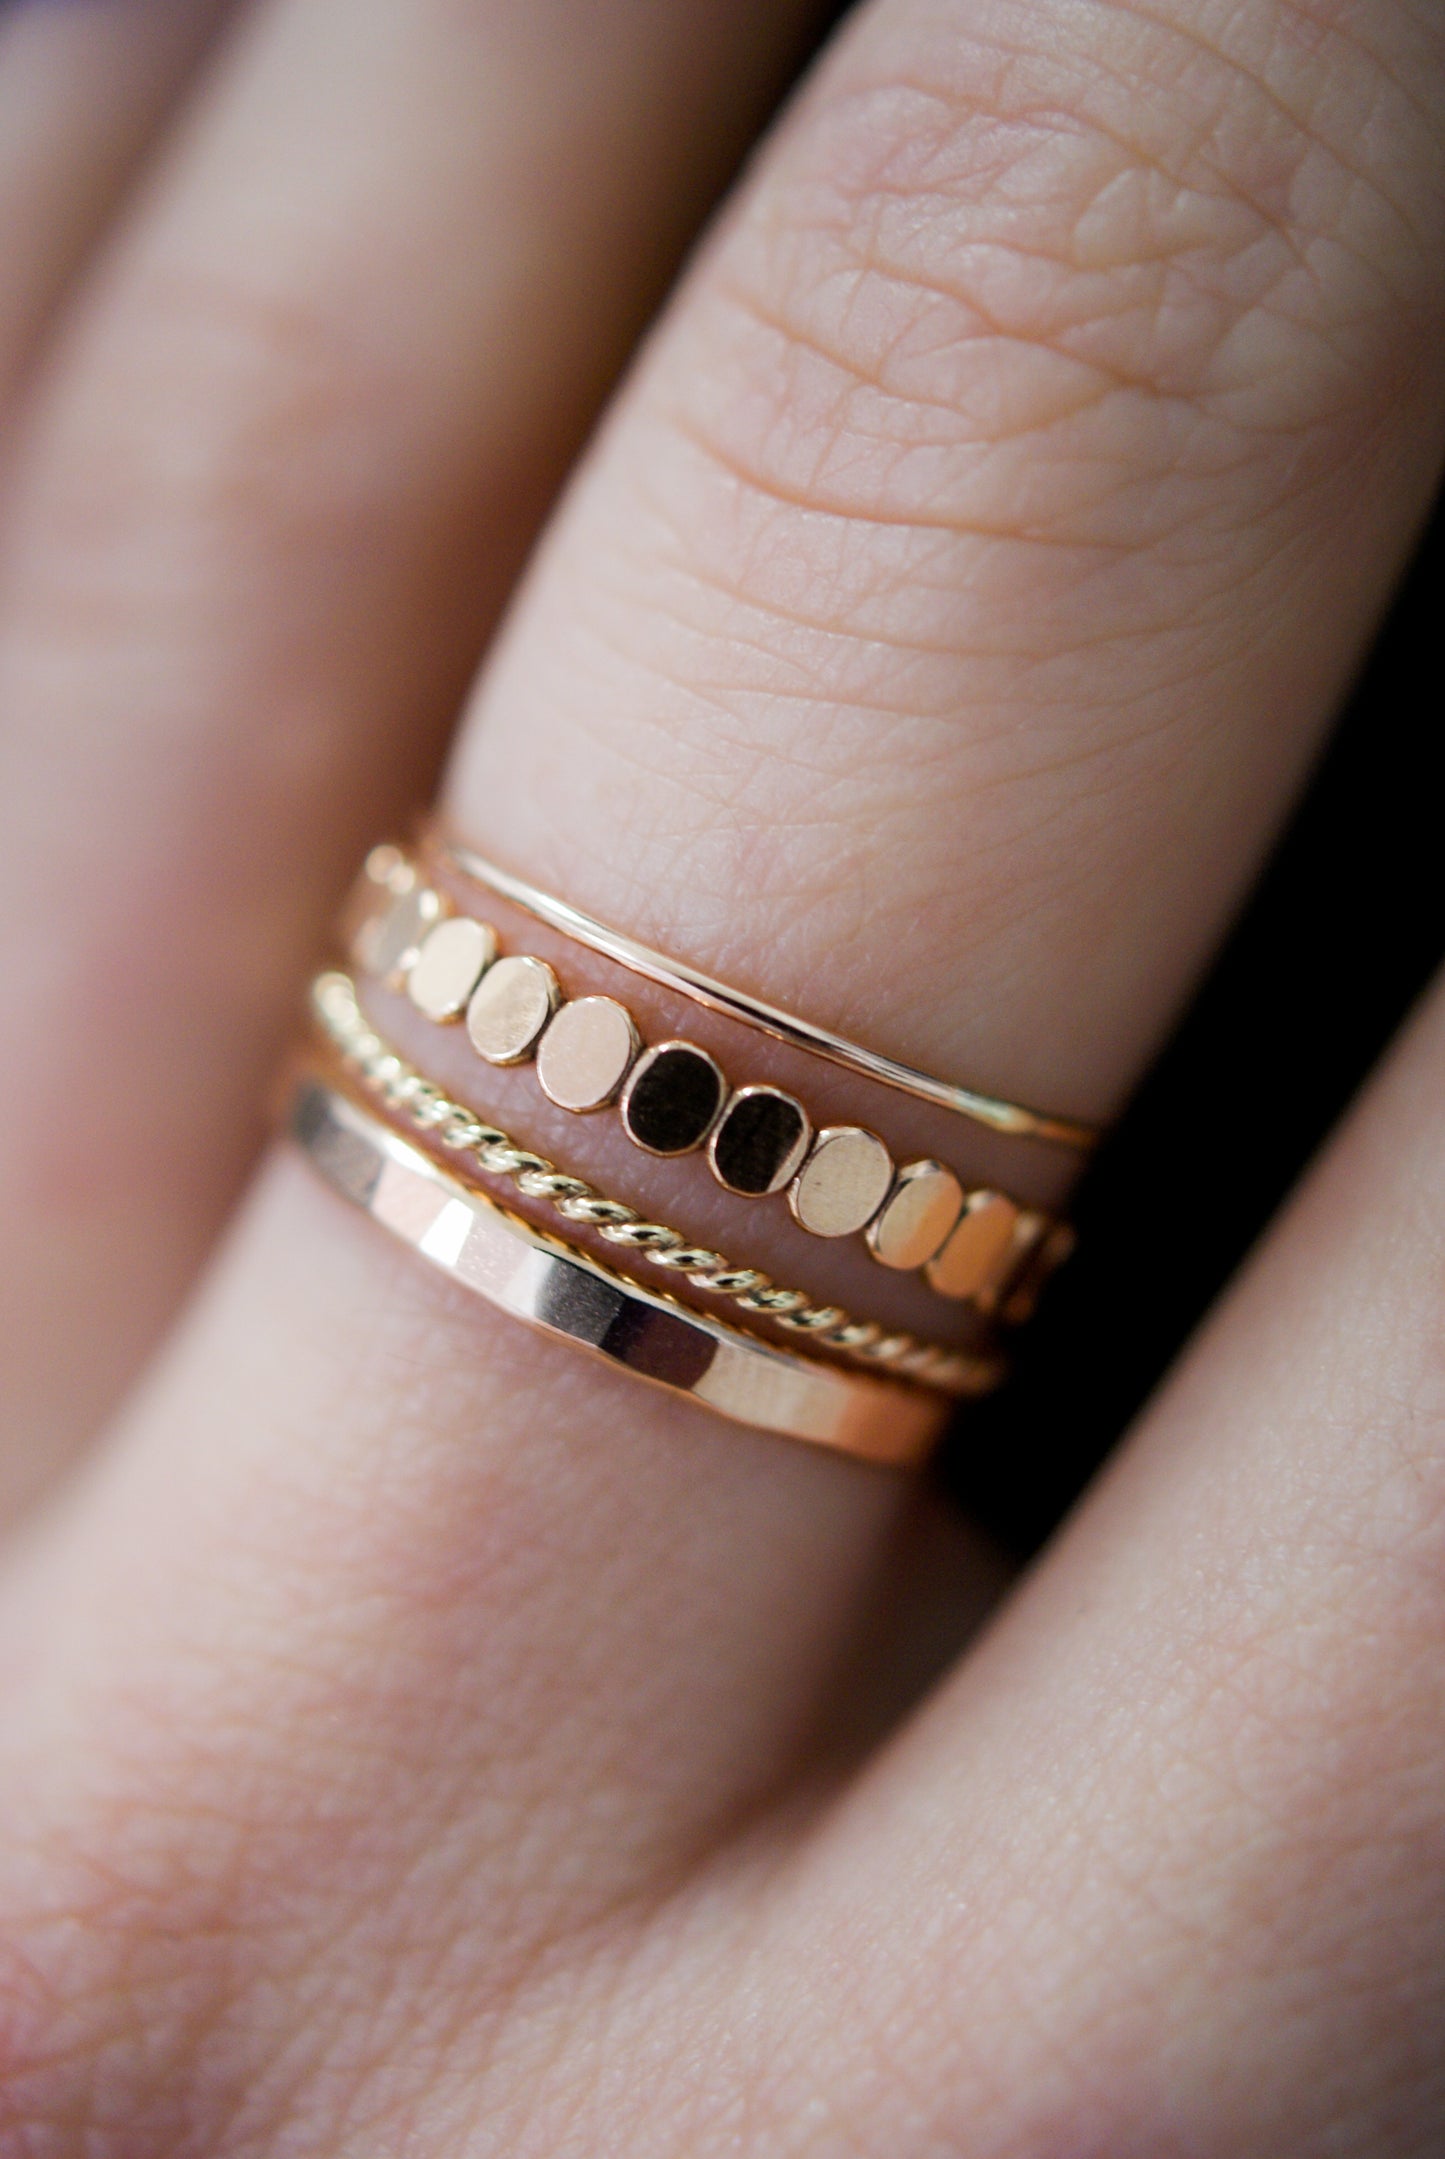 Bead & Twist Texture Set of 4 Stacking Rings, Gold Fill, Rose Gold Fill or Sterling Silver